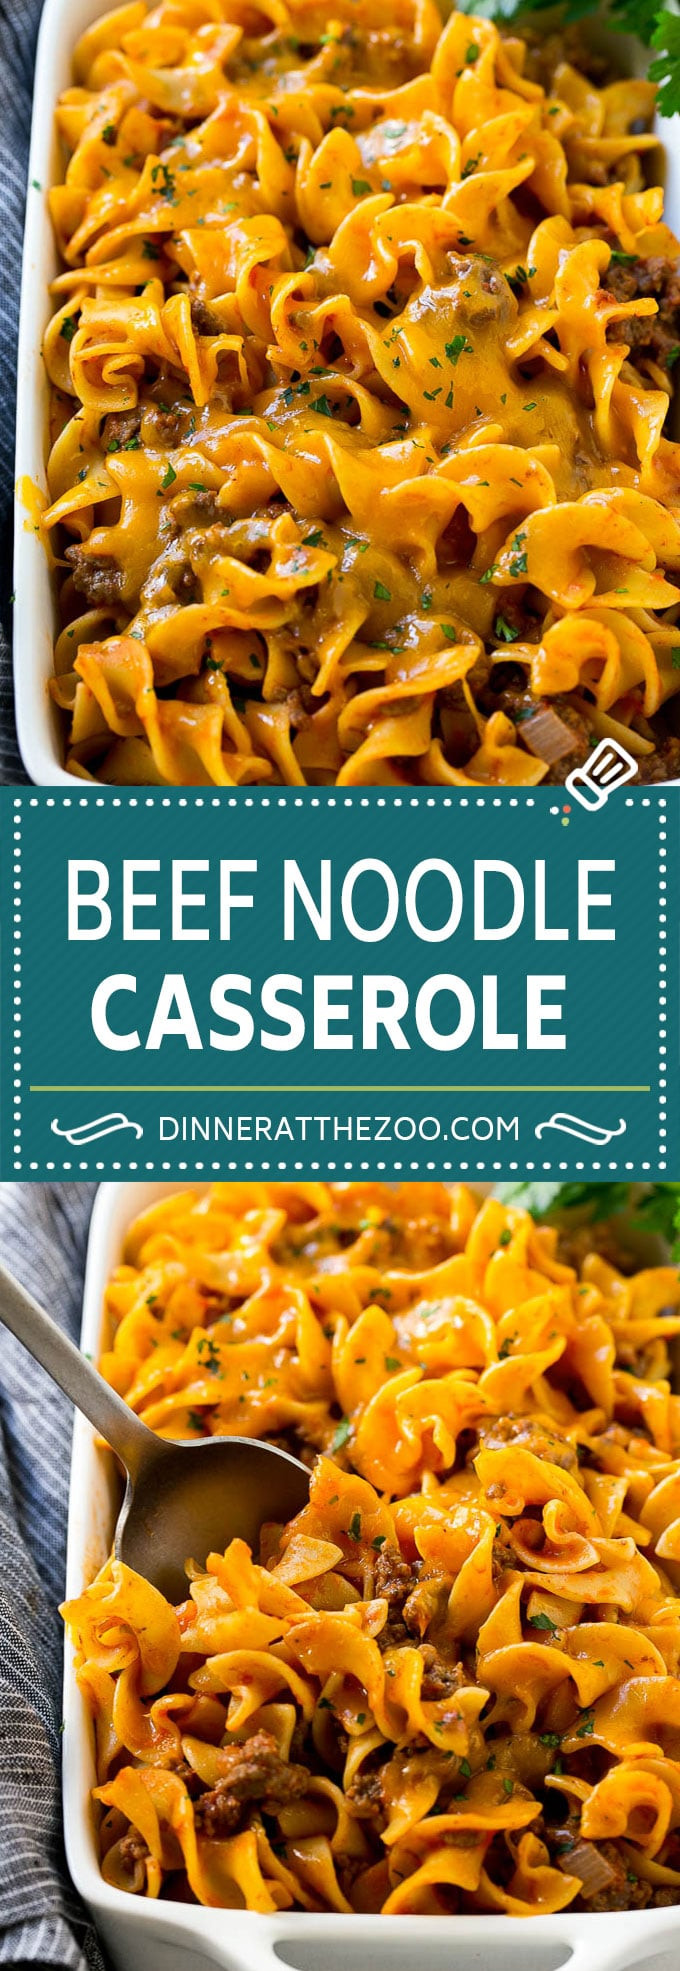 Hamburger And Egg Noodles Casserole
 Beef Noodle Casserole Dinner at the Zoo